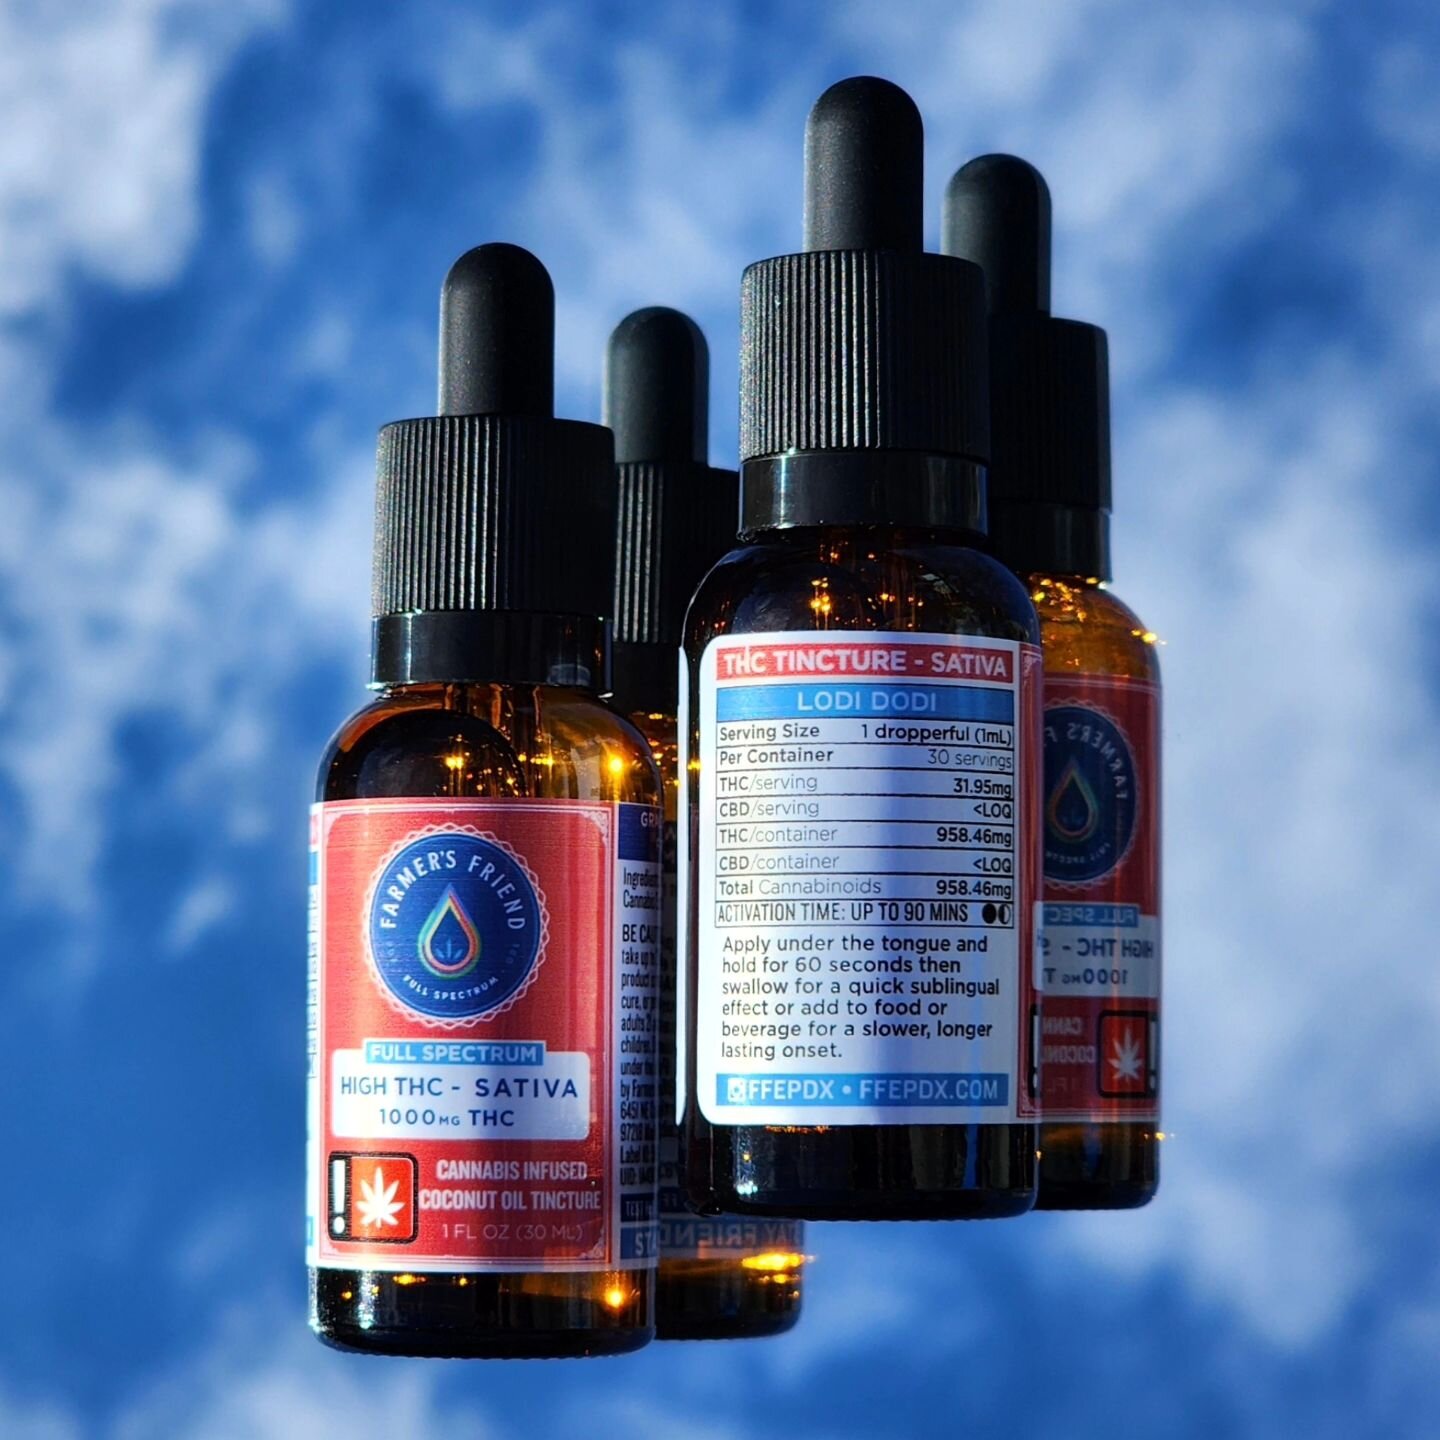 Let the good times roll with our latest batch of high THC sativa tincture featuring Lodi Dodi grown by our friends at @frontierfarmscannabis. This tincture is highly recommended for daytime, with uplifting, creative and energetic qualities that will 